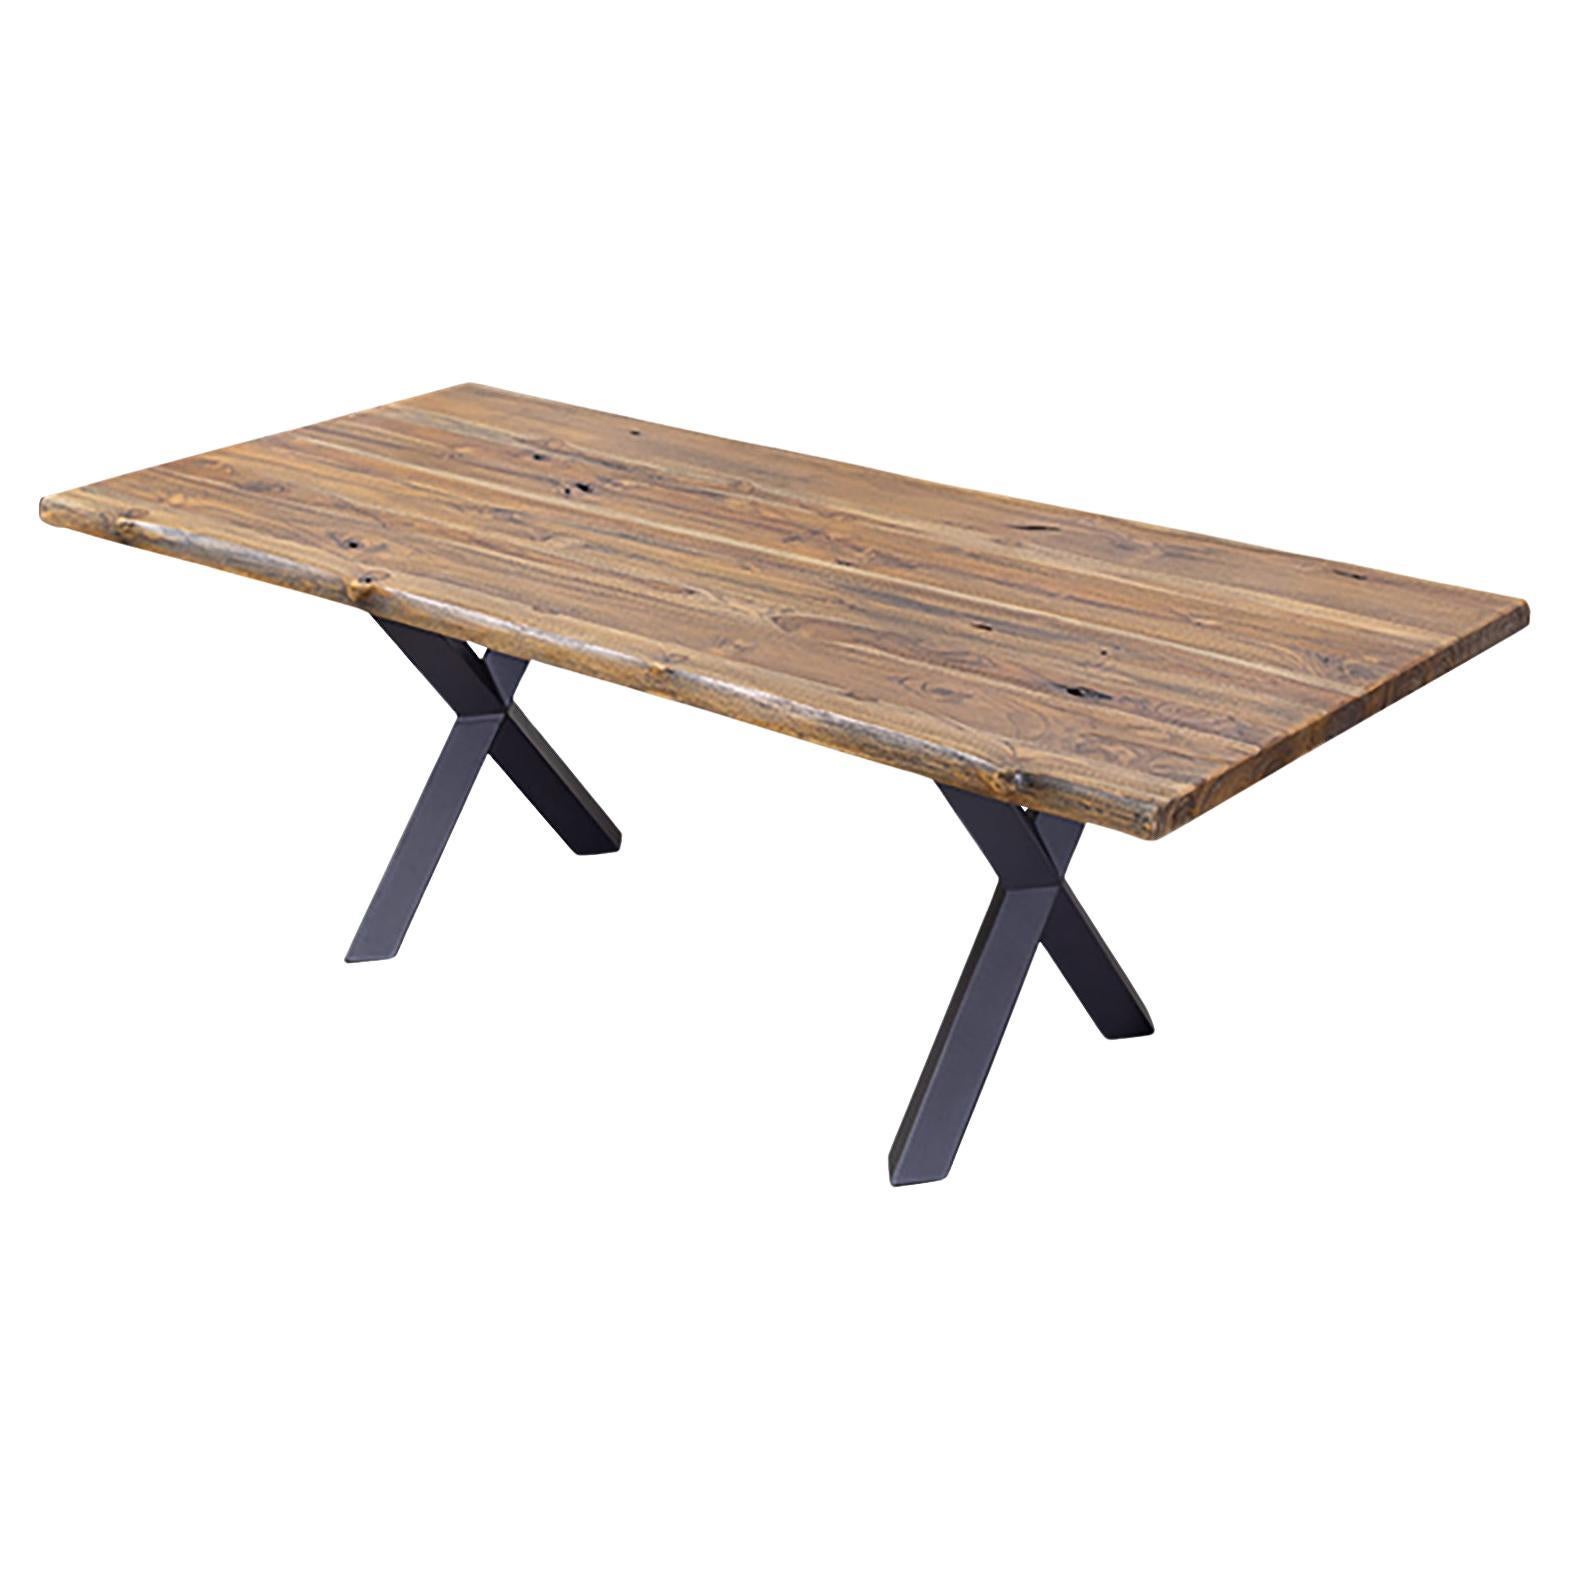 Solid Teak Organic Distressed Rectangular Live Edge Table with Metal Legs For Sale